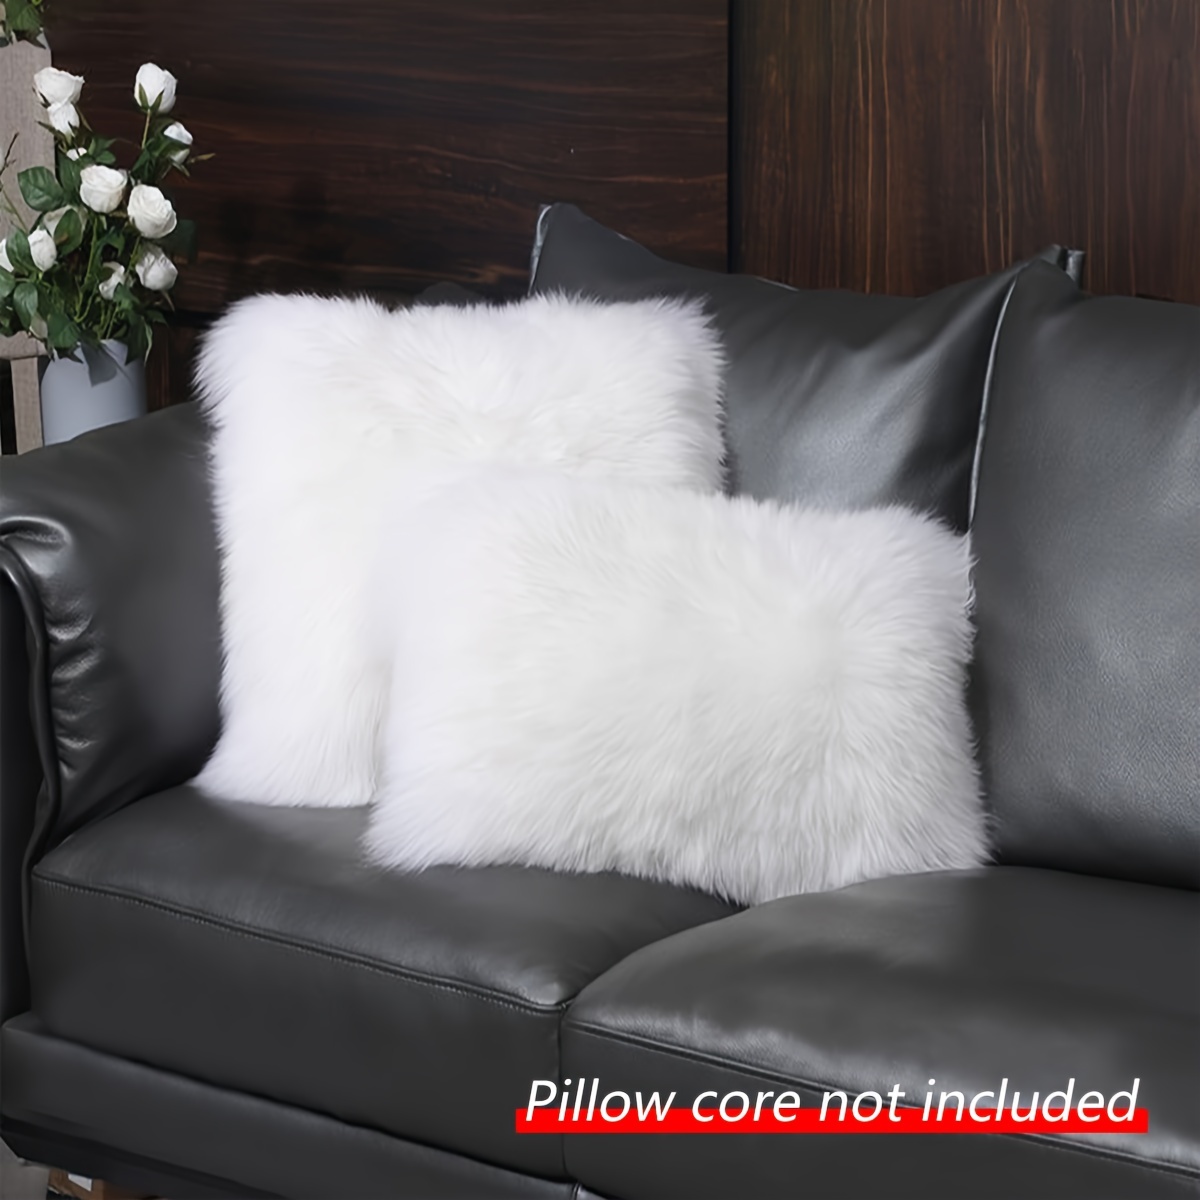 White Leather Plush Sofa (decorative pillows not included